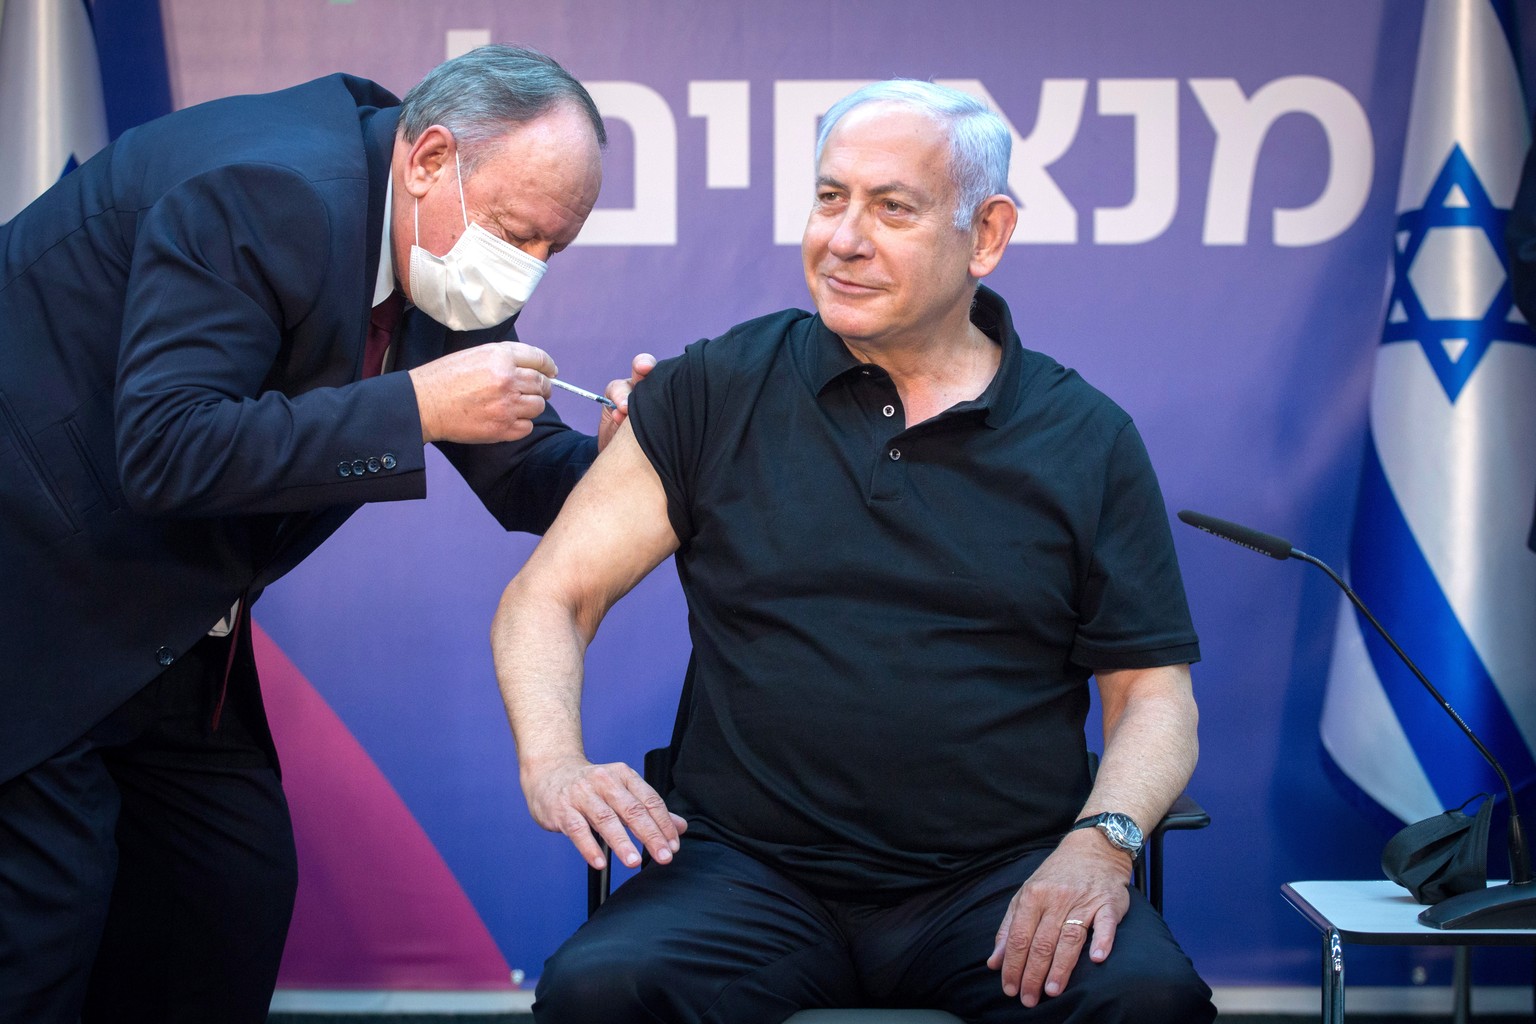 epa08929176 Israeli Prime Minister Minister Benjamin Netanyahu is administered the second jab of the Covid-19 vaccine, at Sheba Medical Center in Ramat Gan, Israel, 09 January 2021. Netanyahu received ...